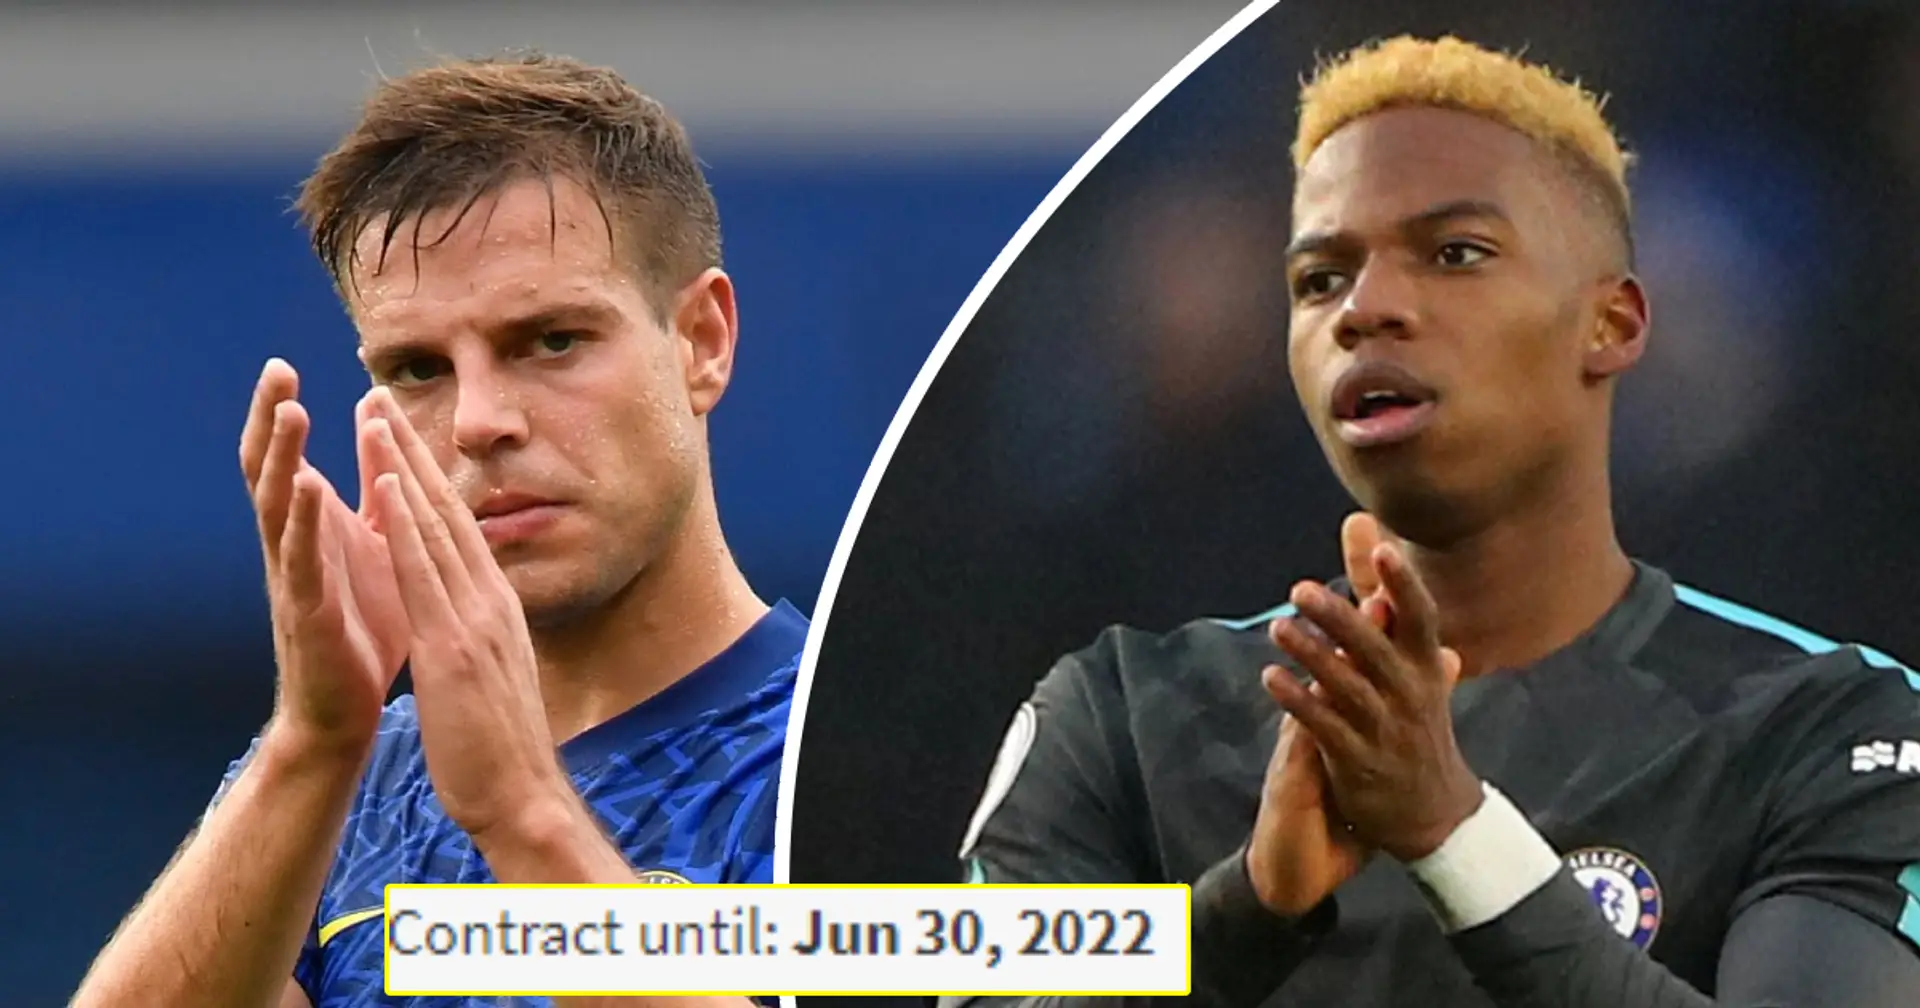 6 Chelsea players who could become free agents next June as Musonda confirms 2022 exit